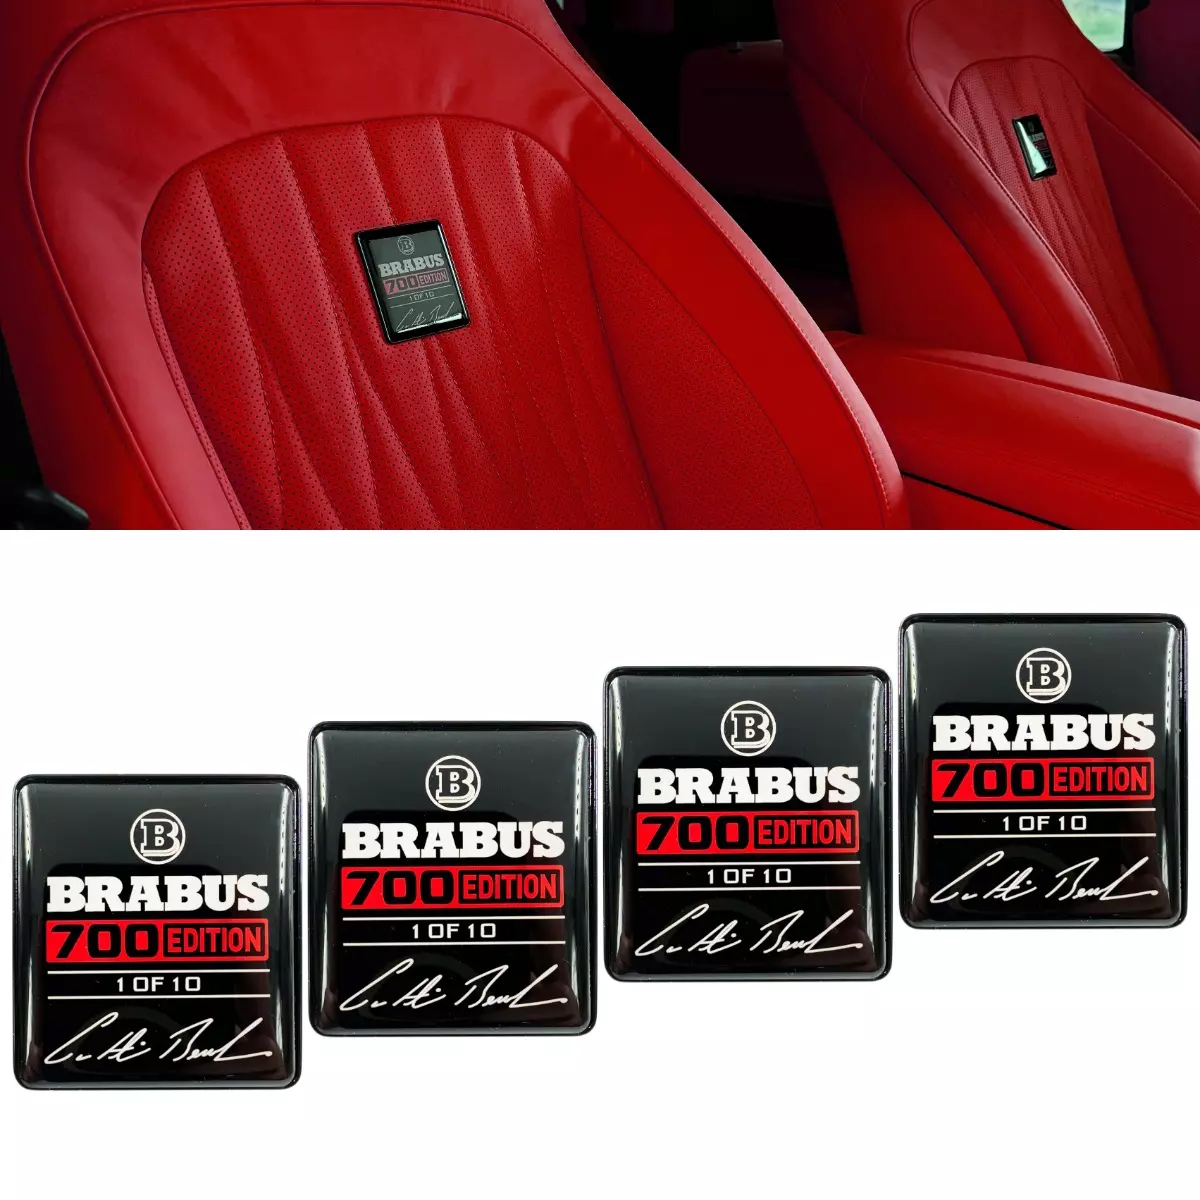 Brabus 700 Edition 1 of 10 Red Seat Emblems Set for Mercedes-Benz W463A